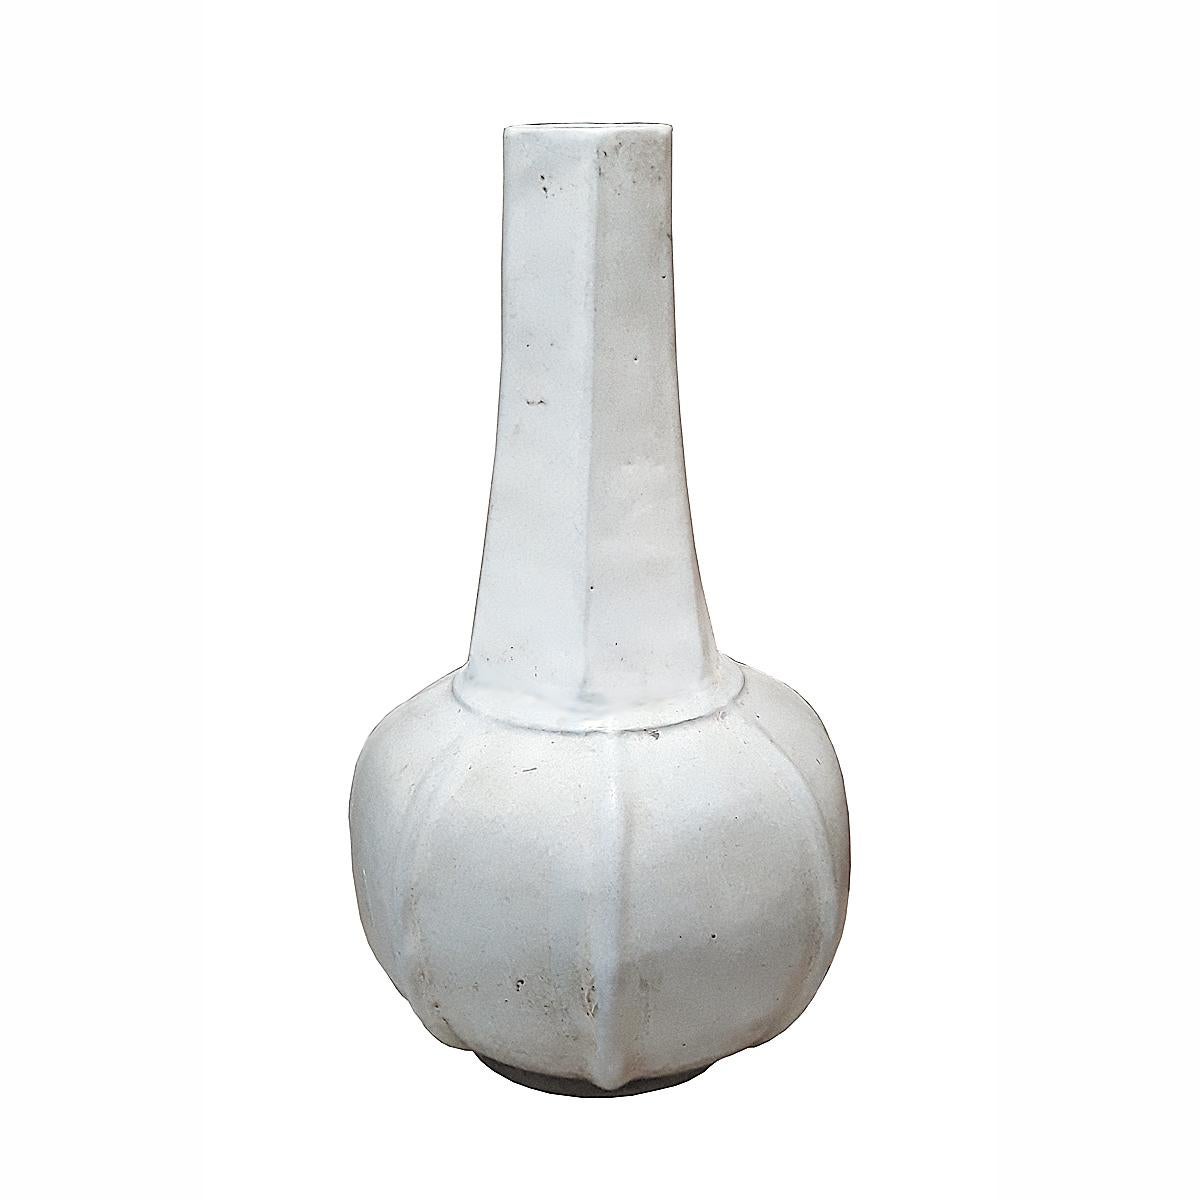 A ceramic vase handcrafted in Sri Satchanalai, Thailand, circa 1965. White smooth glaze, narrow bottle-style opening, geometric design. 16.5 inches high x 9 inches in diameter.